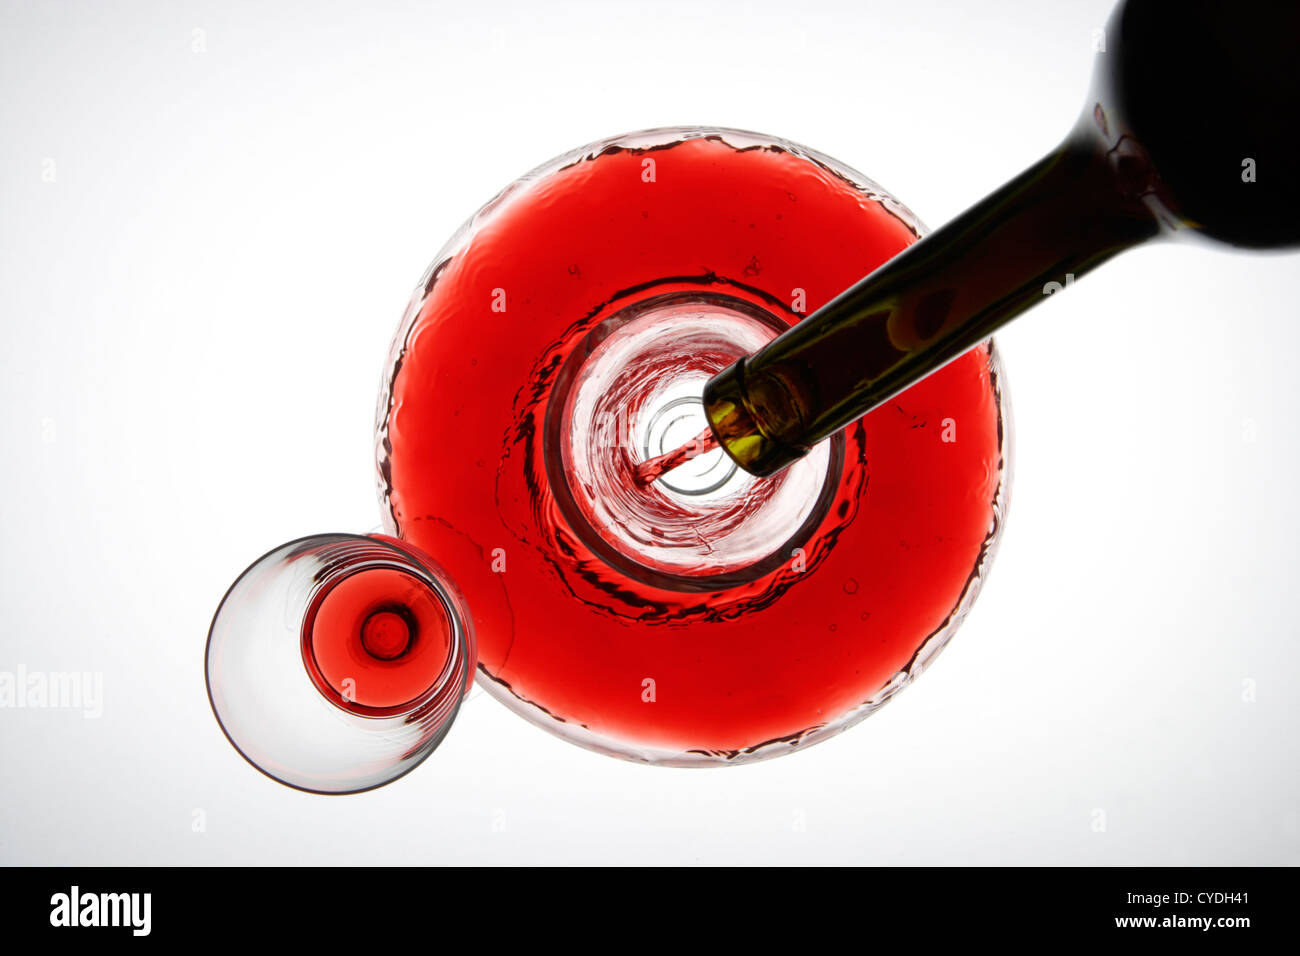 carafe with red wine Stock Photo